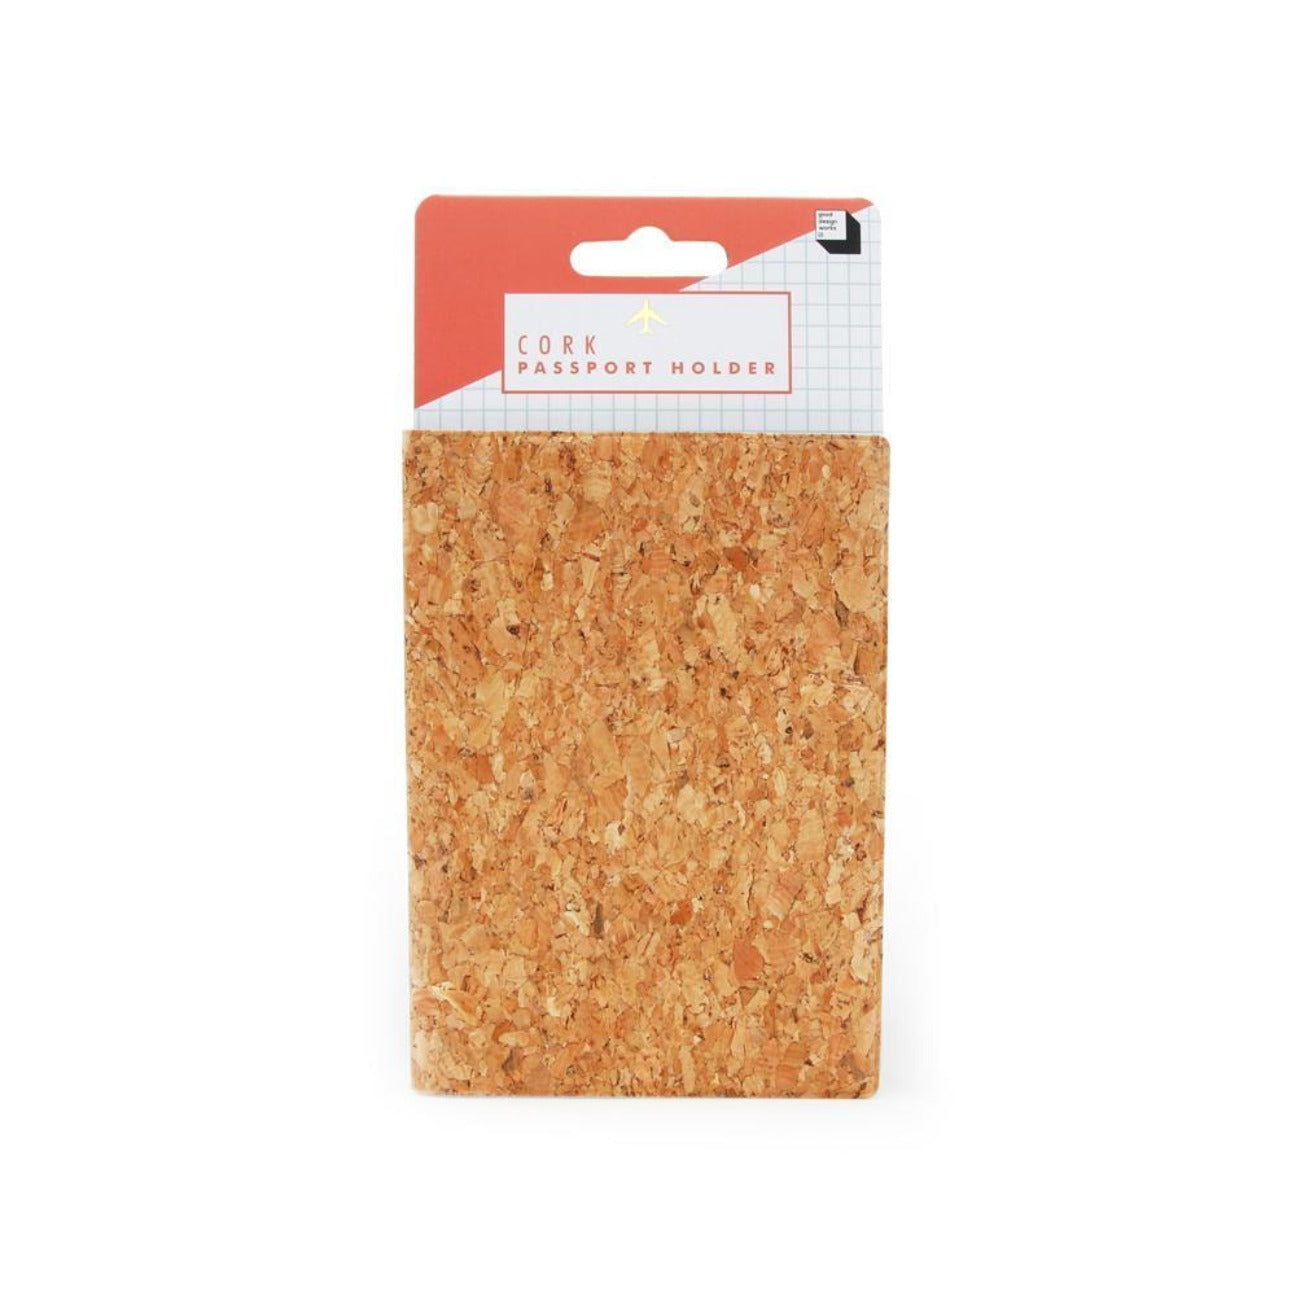 This small passport holder is made of natural cork fabric.